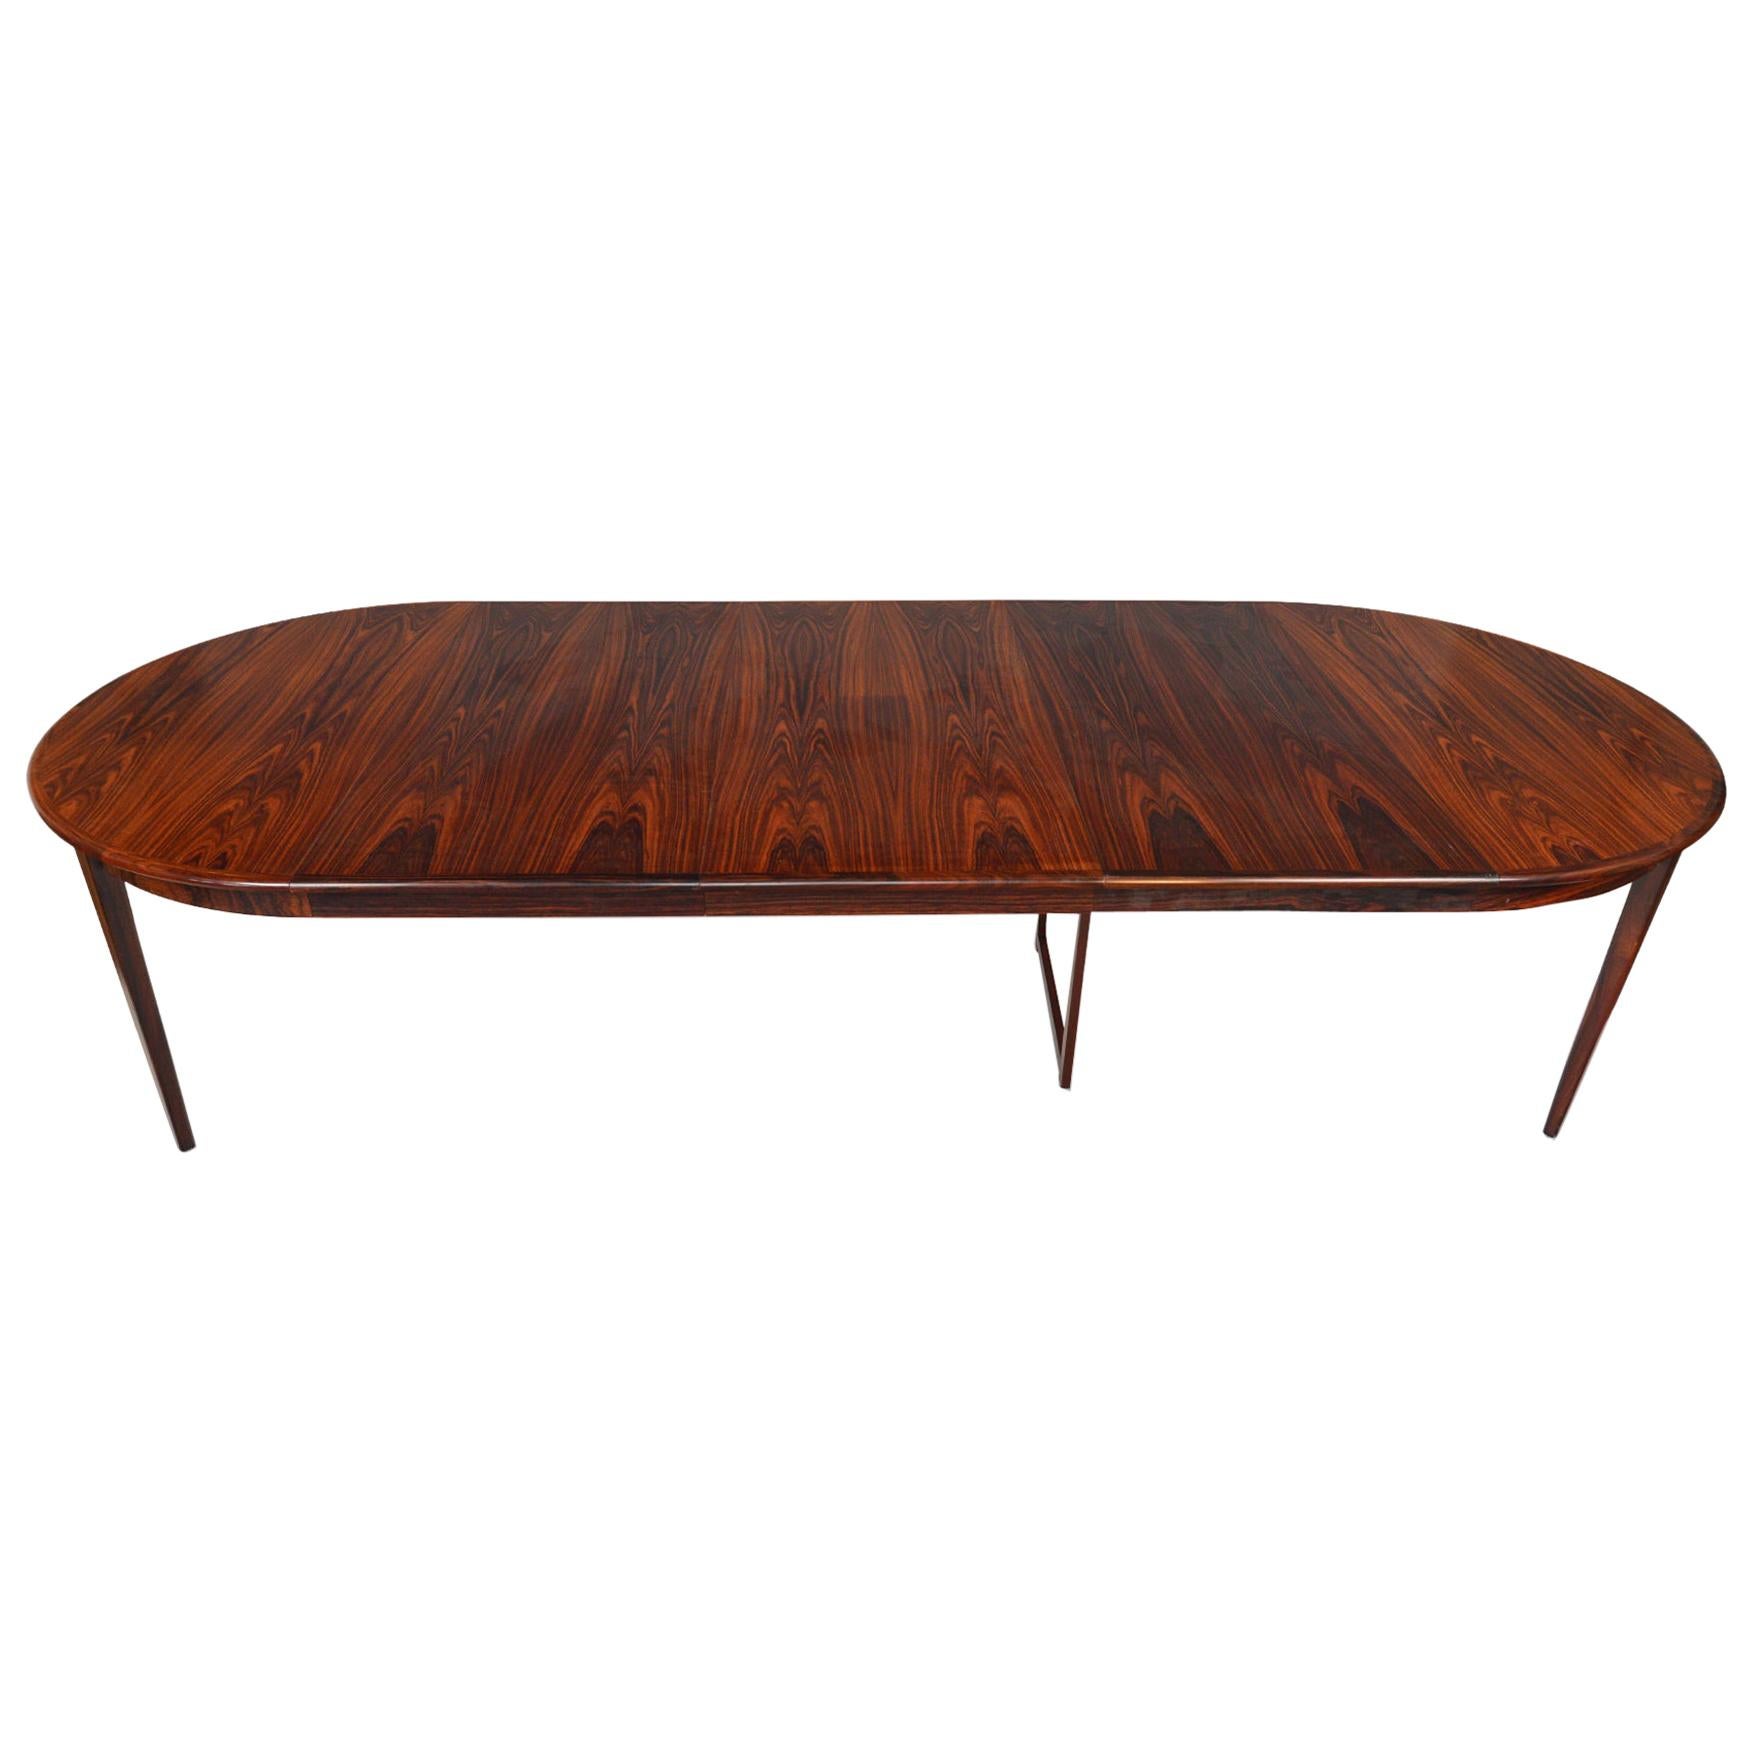 Danish Modern Round Rosewood Table with Three Leaves by Moreddi